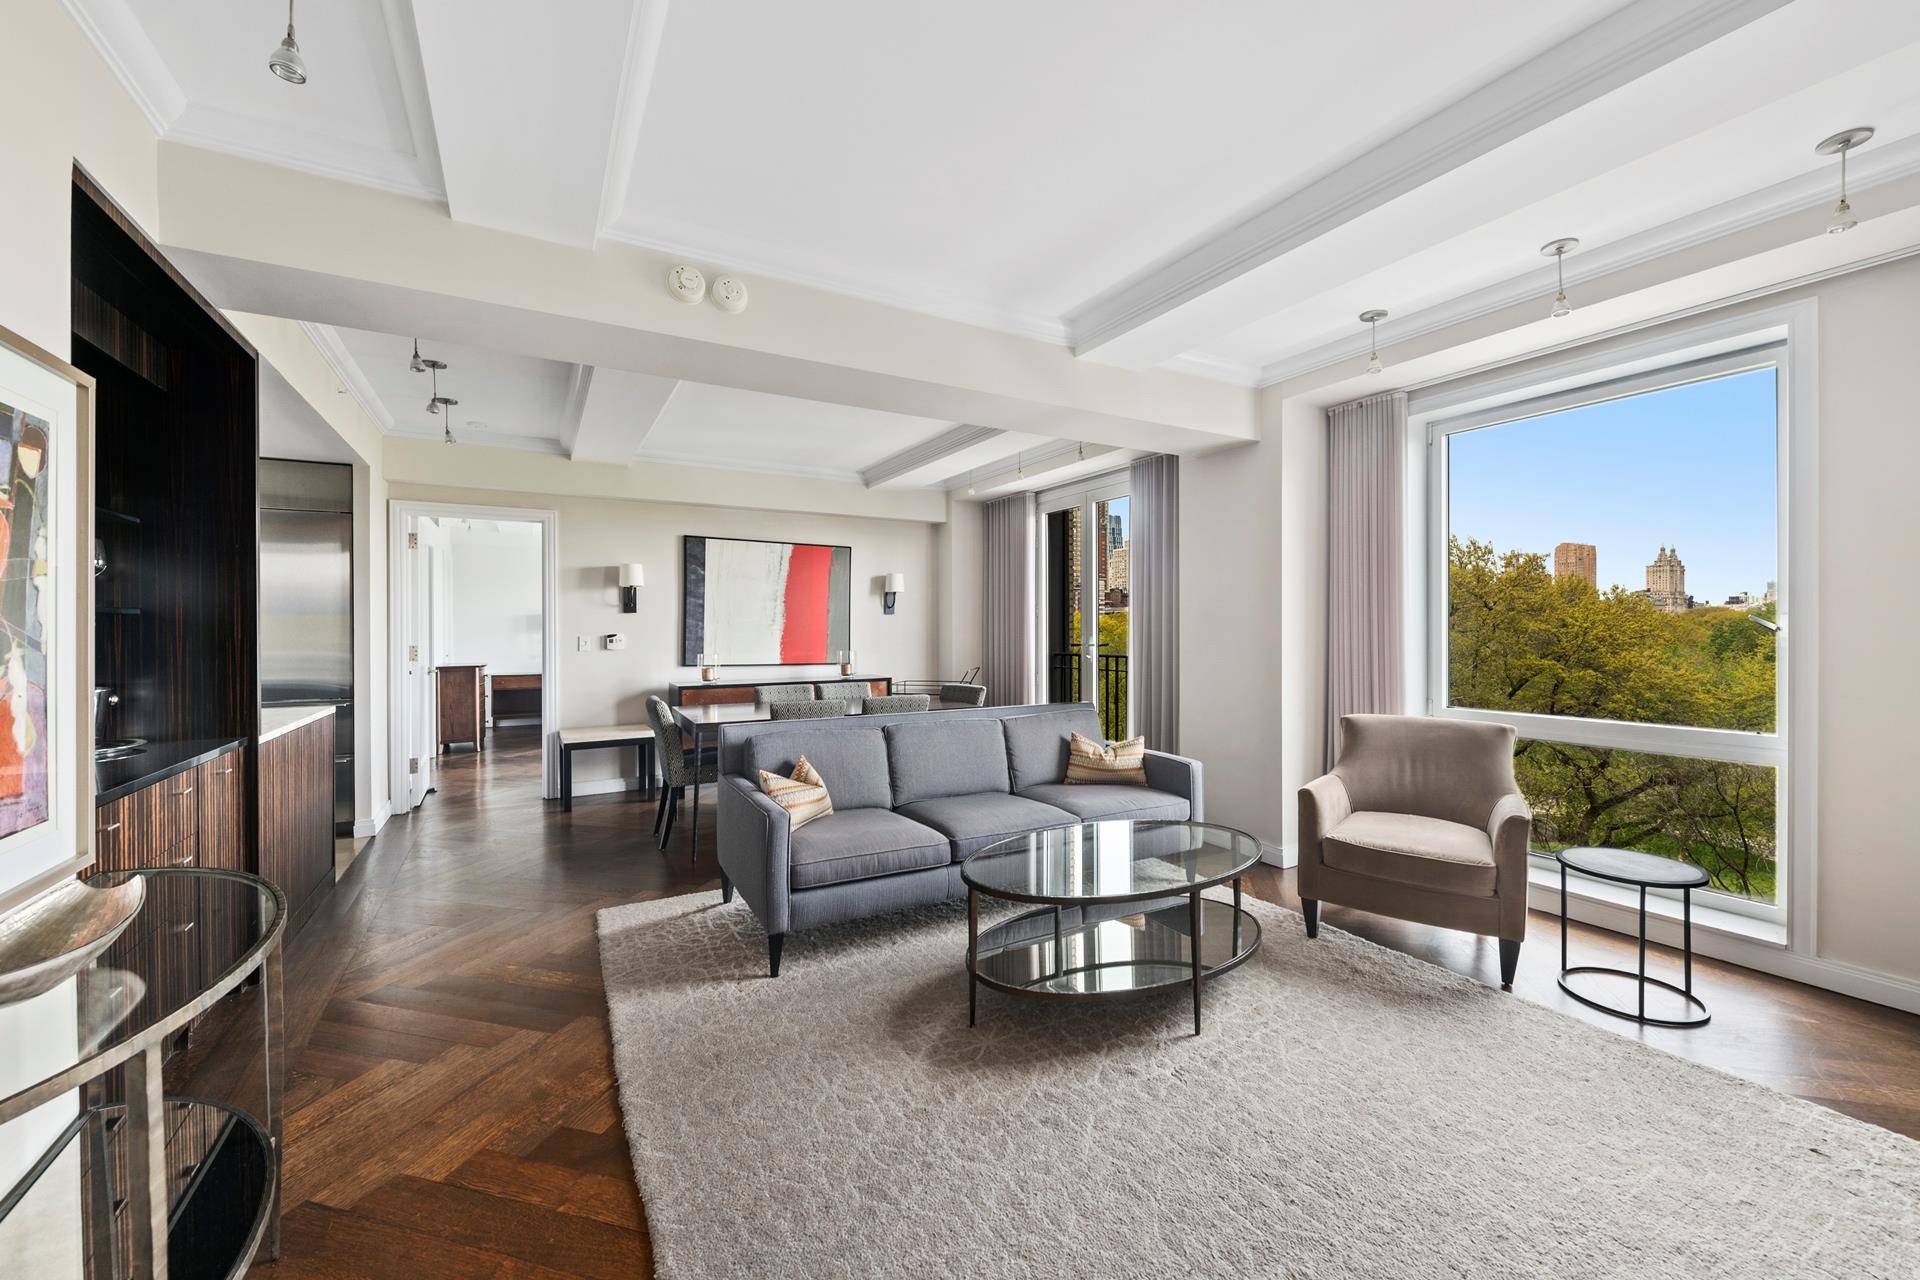 With spectacular views of Central Park, this 2 bedroom, 2.